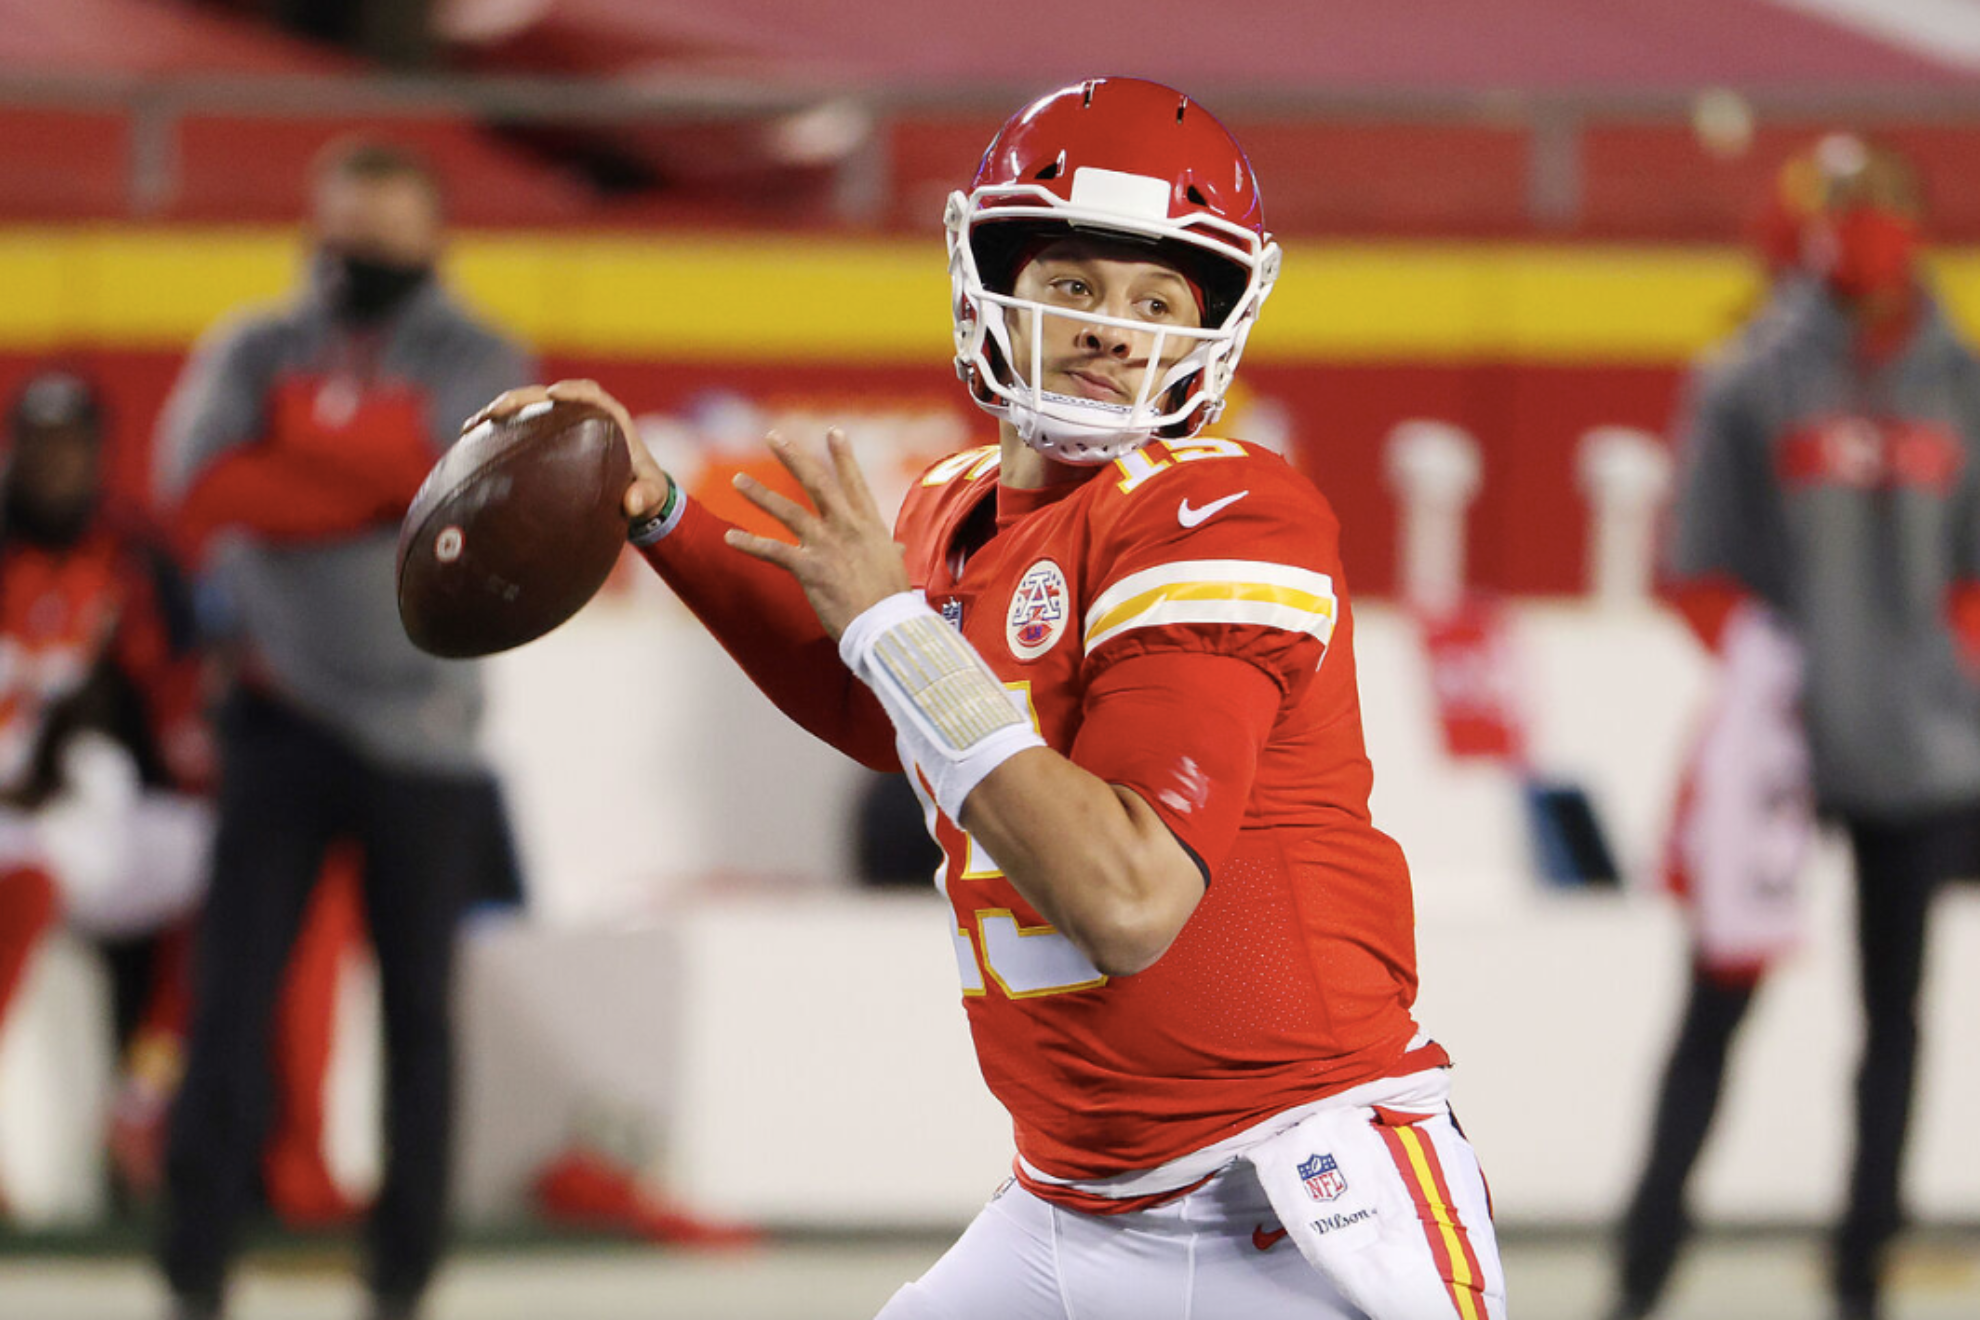 Patrick Mahomes reacts to NFL turf debate after Aaron Rodgers injury